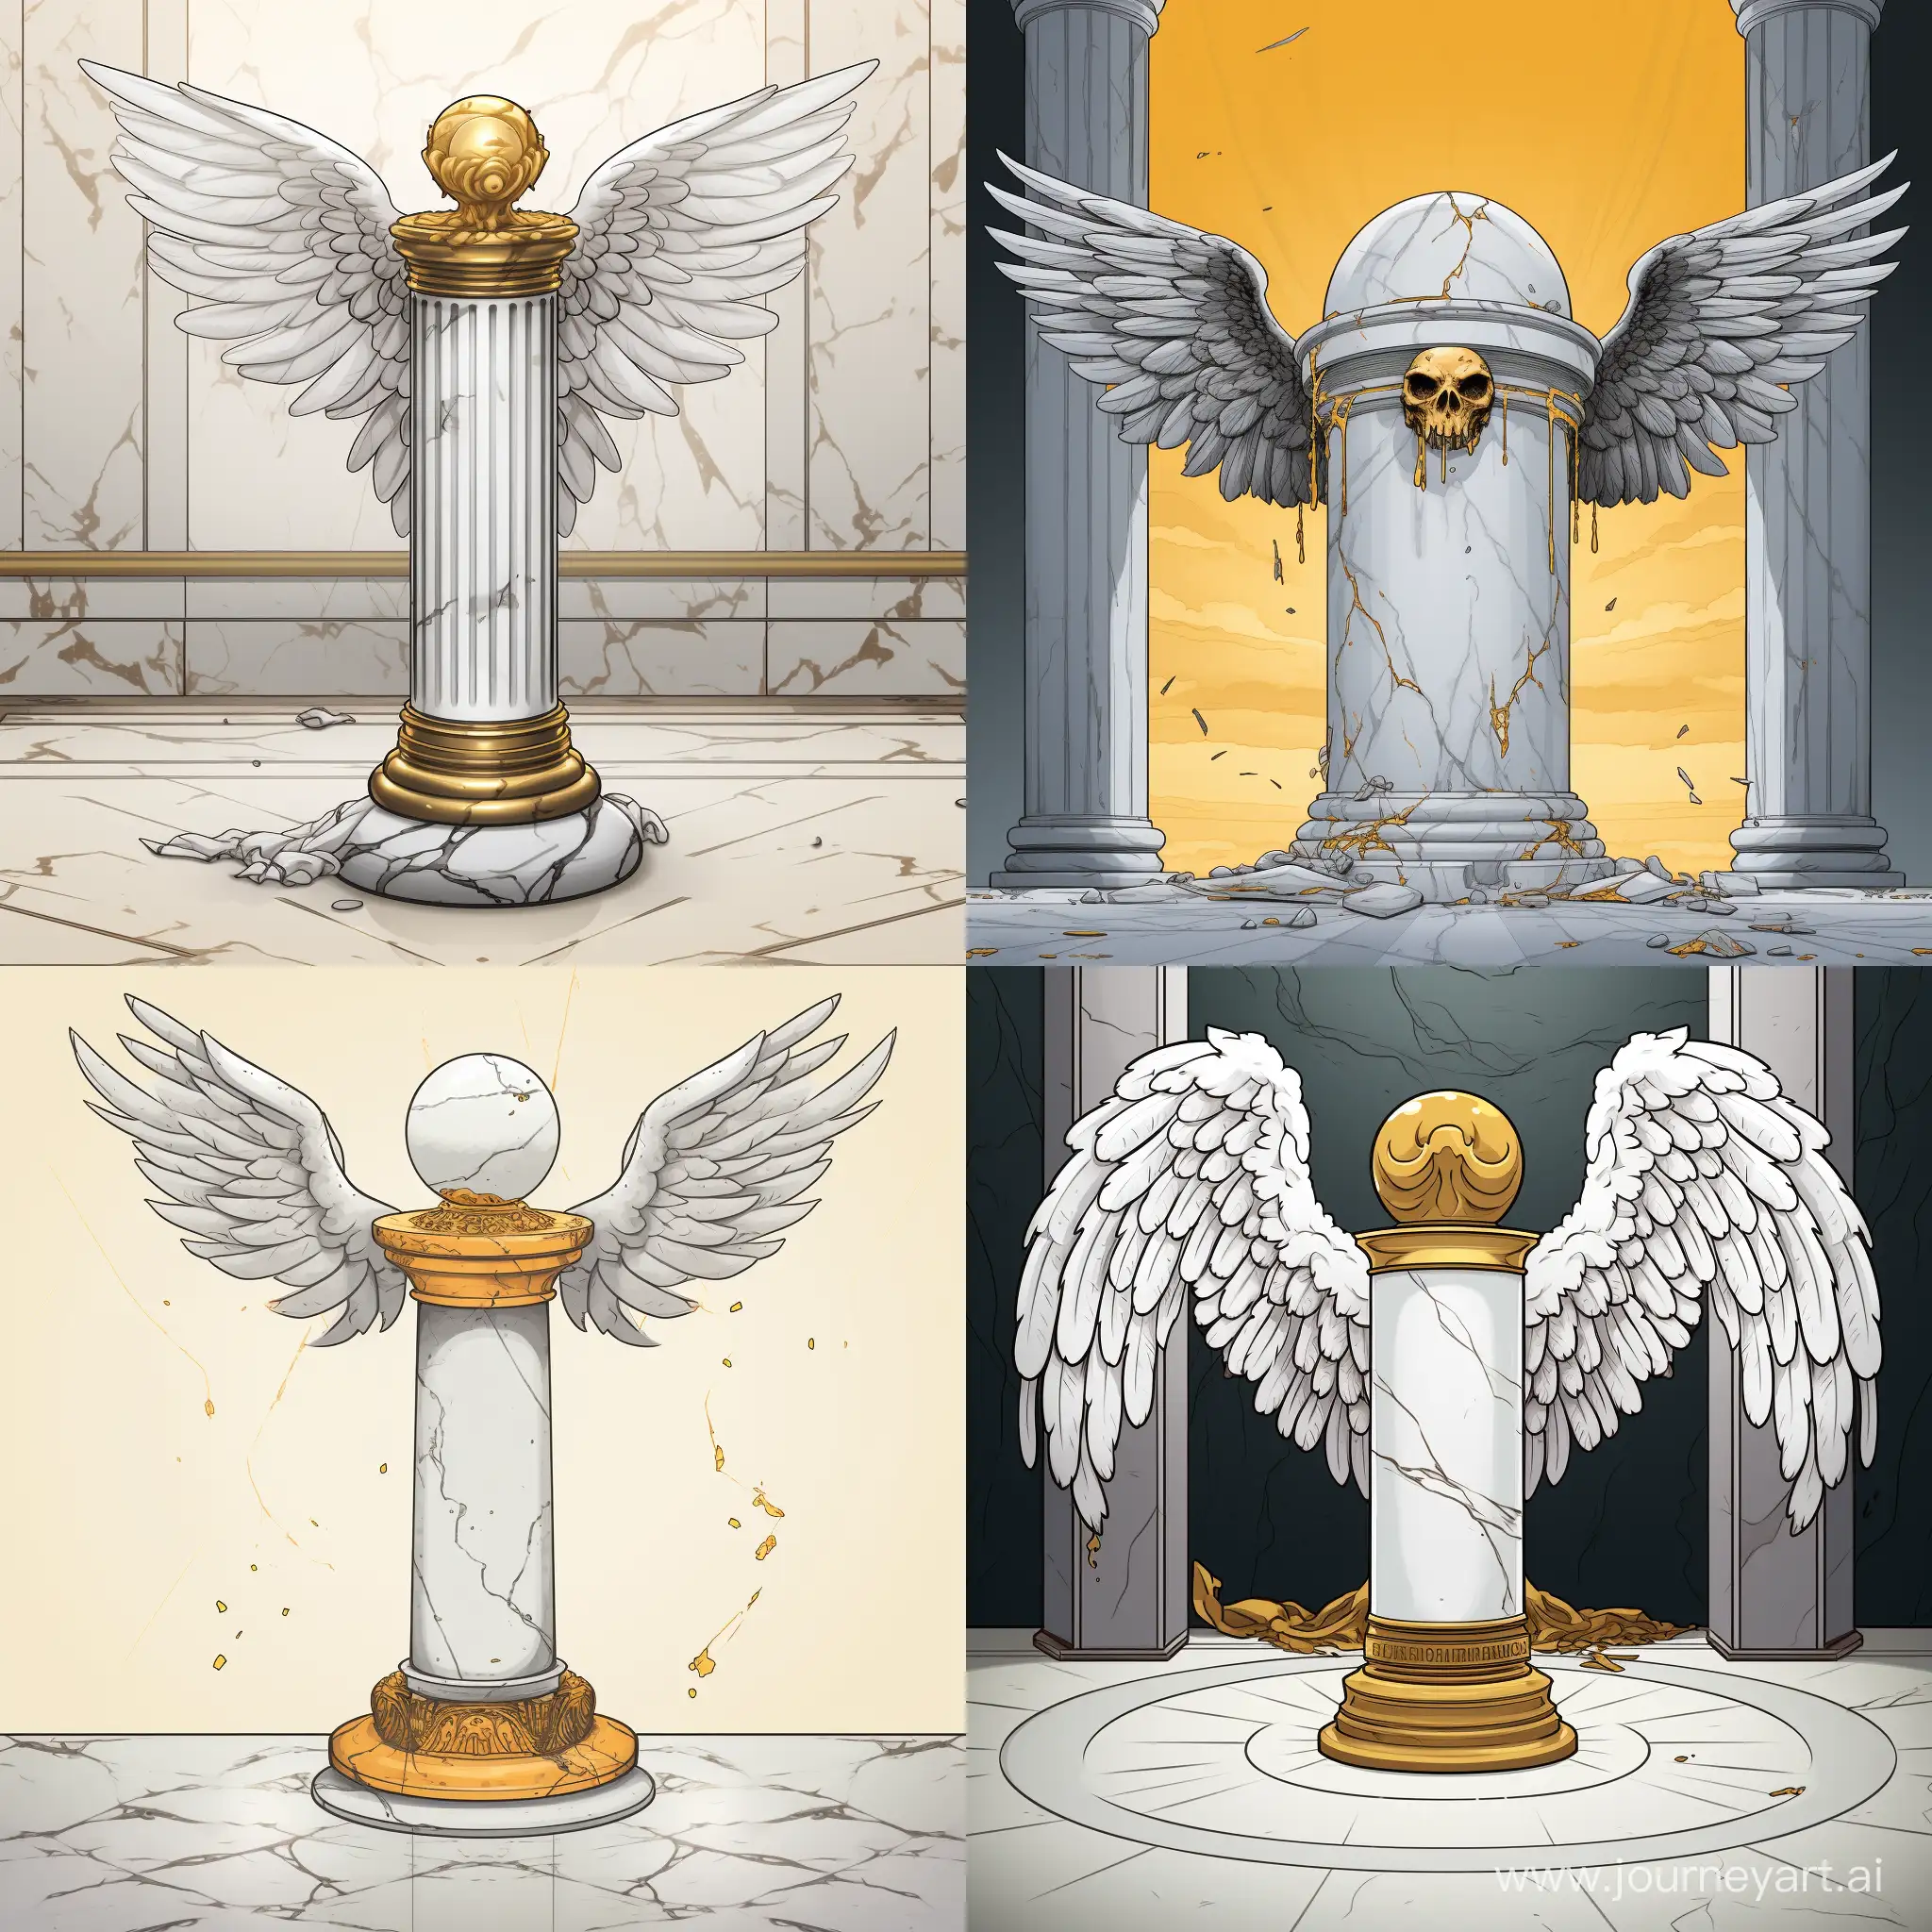 Sinister-Comic-Style-White-Marble-Pillar-with-Hovering-Gold-Globe